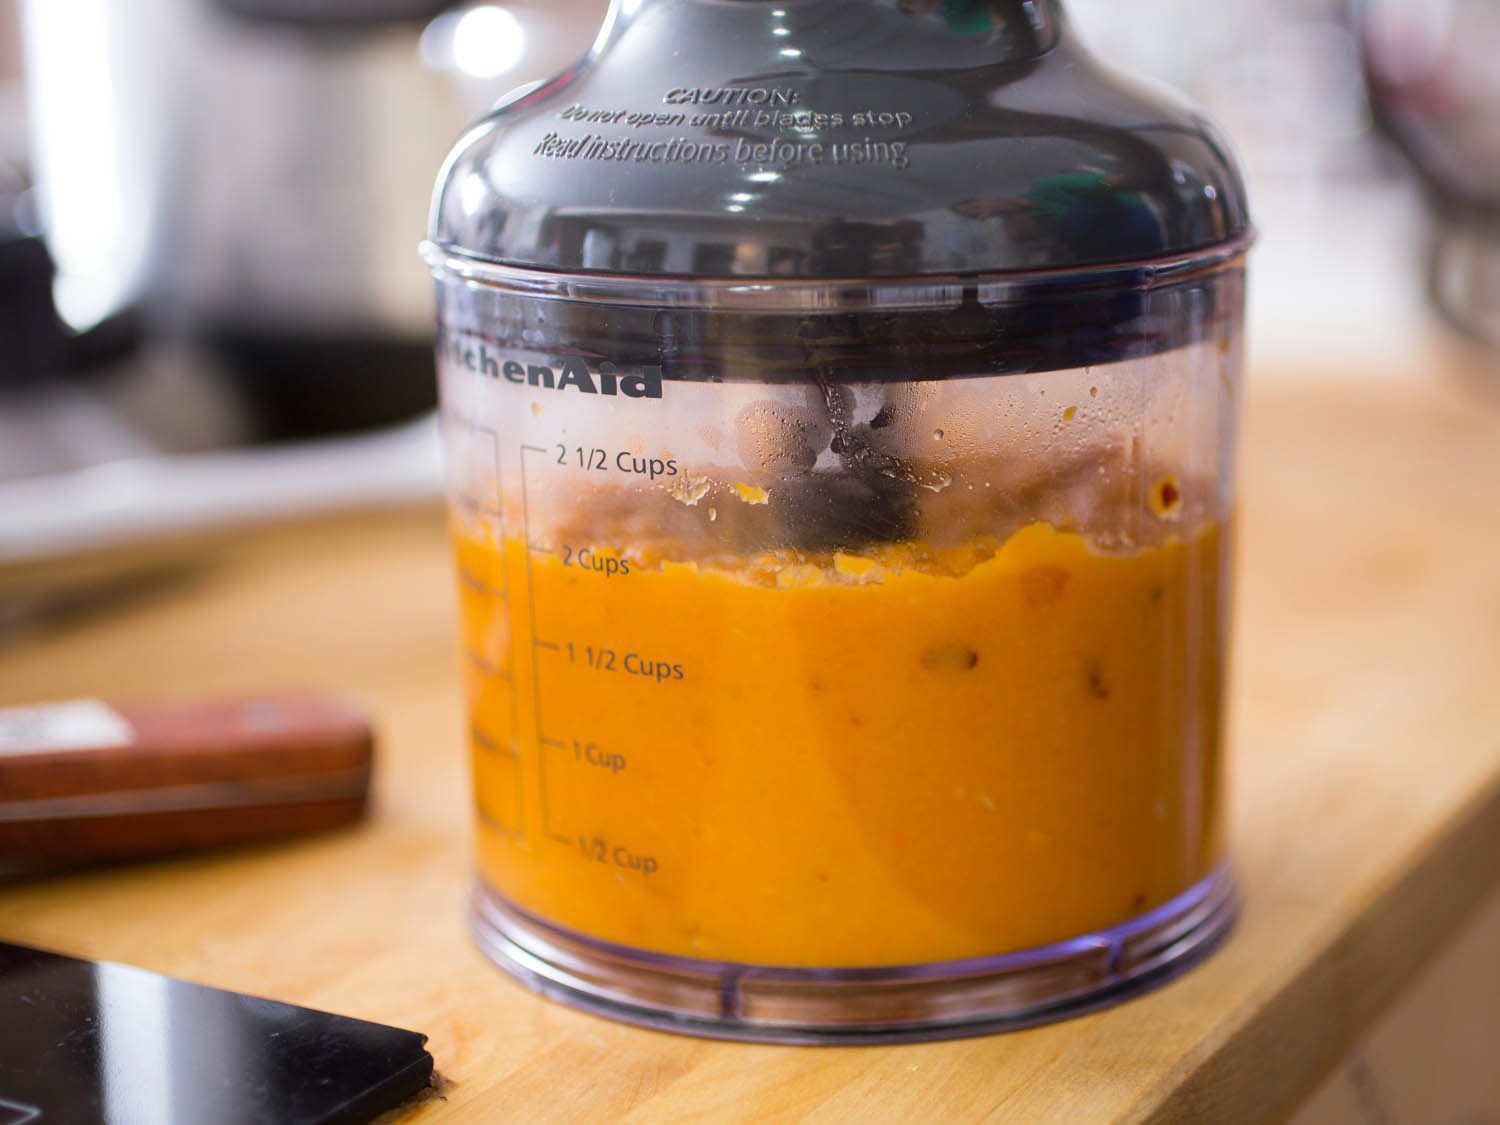 Roasted butternut squash purée in a blender canister